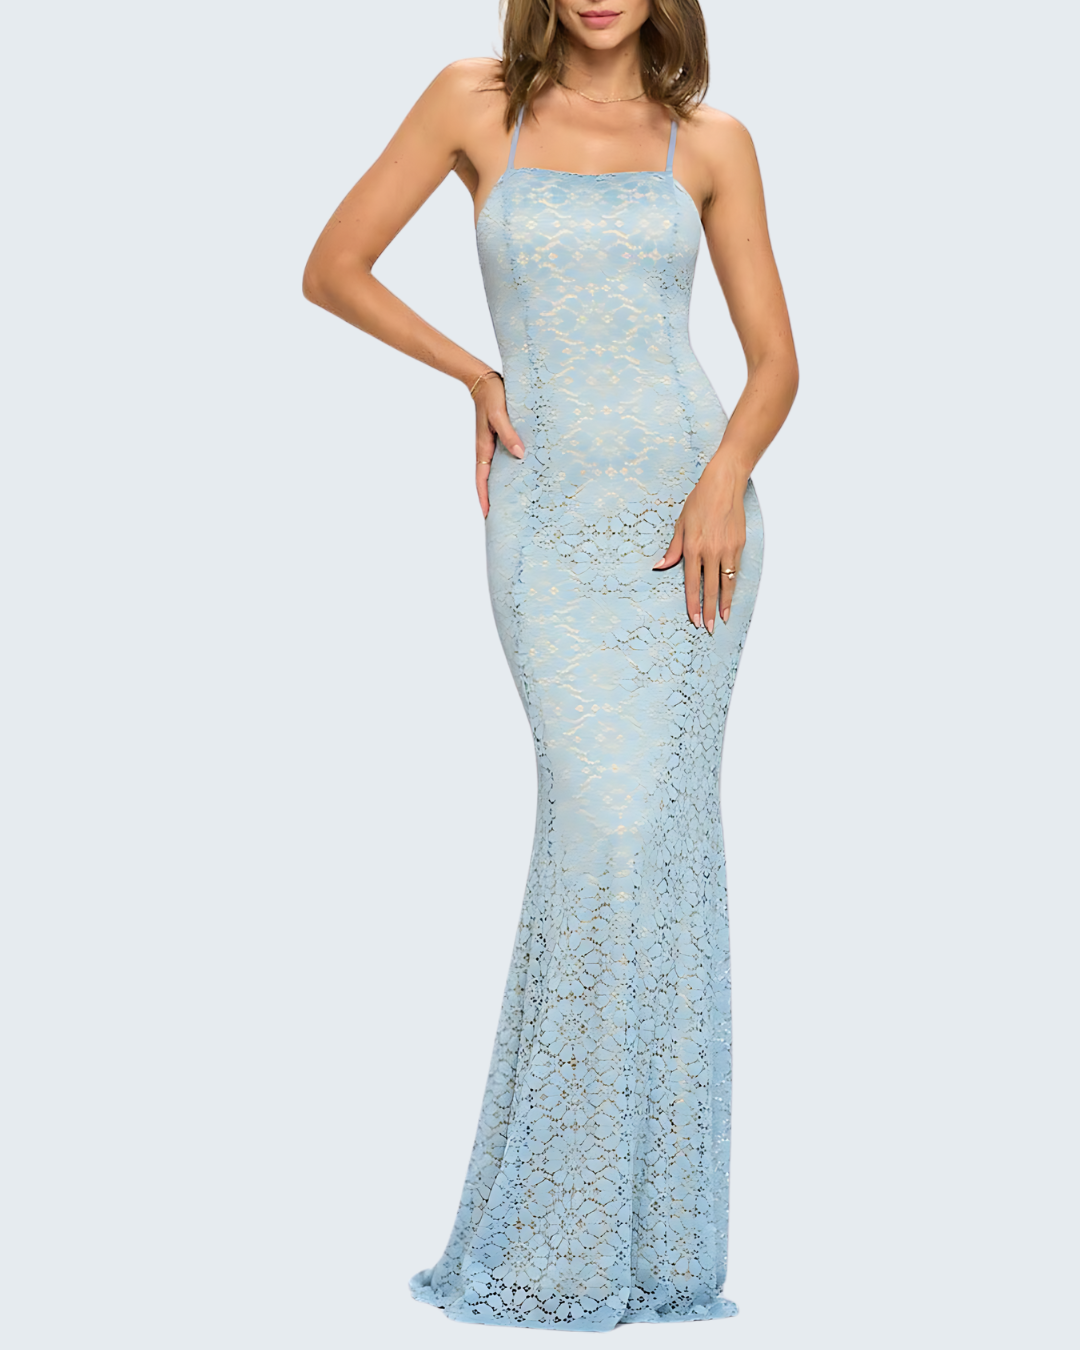 Intricate Lace Mermaid Gown with Open Back Detail - Petal Blue